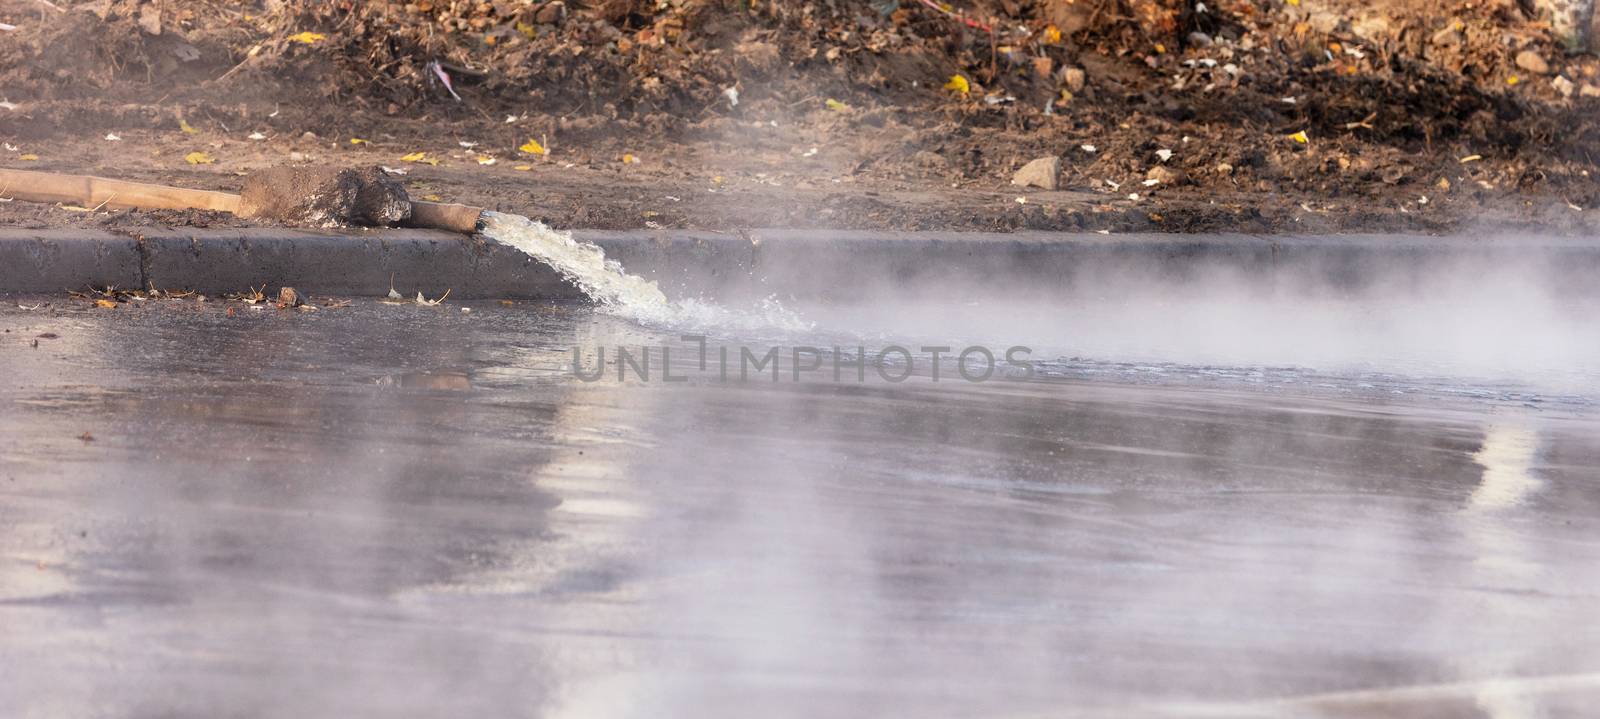 Breakthrough pipes with hot water, water is pumped out onto the road with a pump and a fire hose, close-up. by Sergii